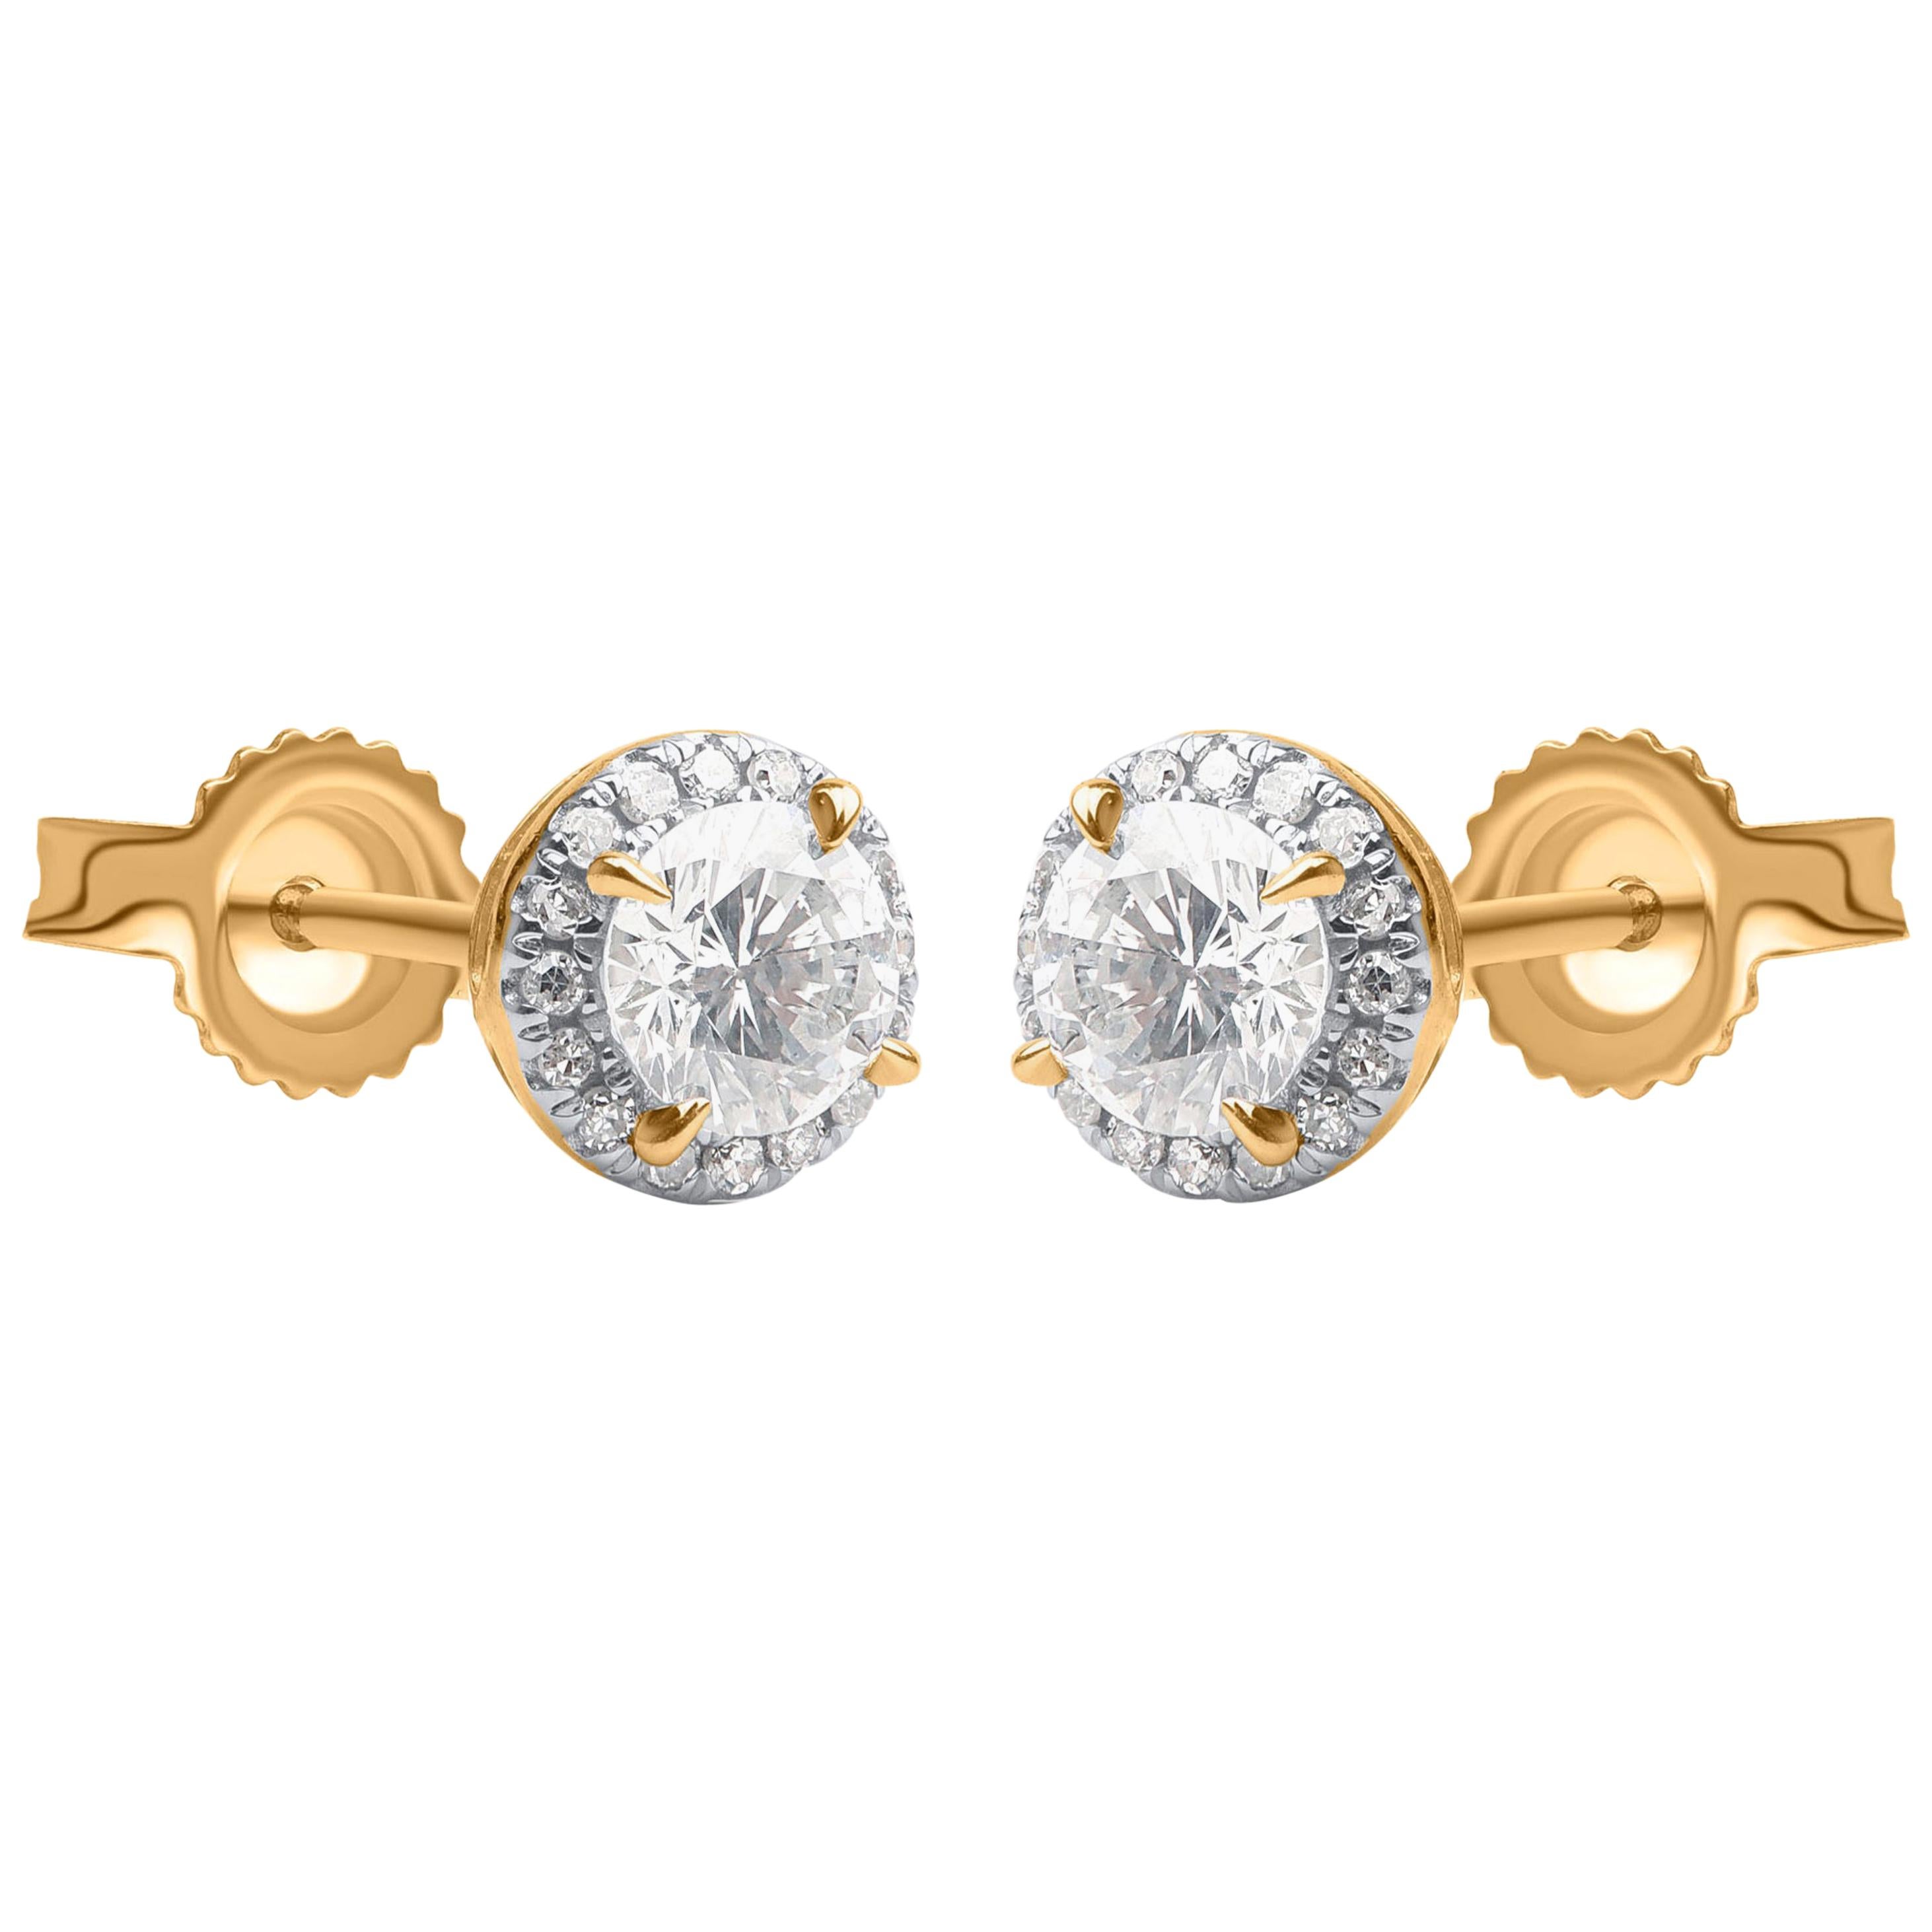 These stud earrings feature 36 natural brilliant diamonds set in prong setting and are handcrafted by our in-house experts, crafted in 10-karat yellow gold. These diamond stud earrings look classic and elegant. The size of the center stone is 0.40